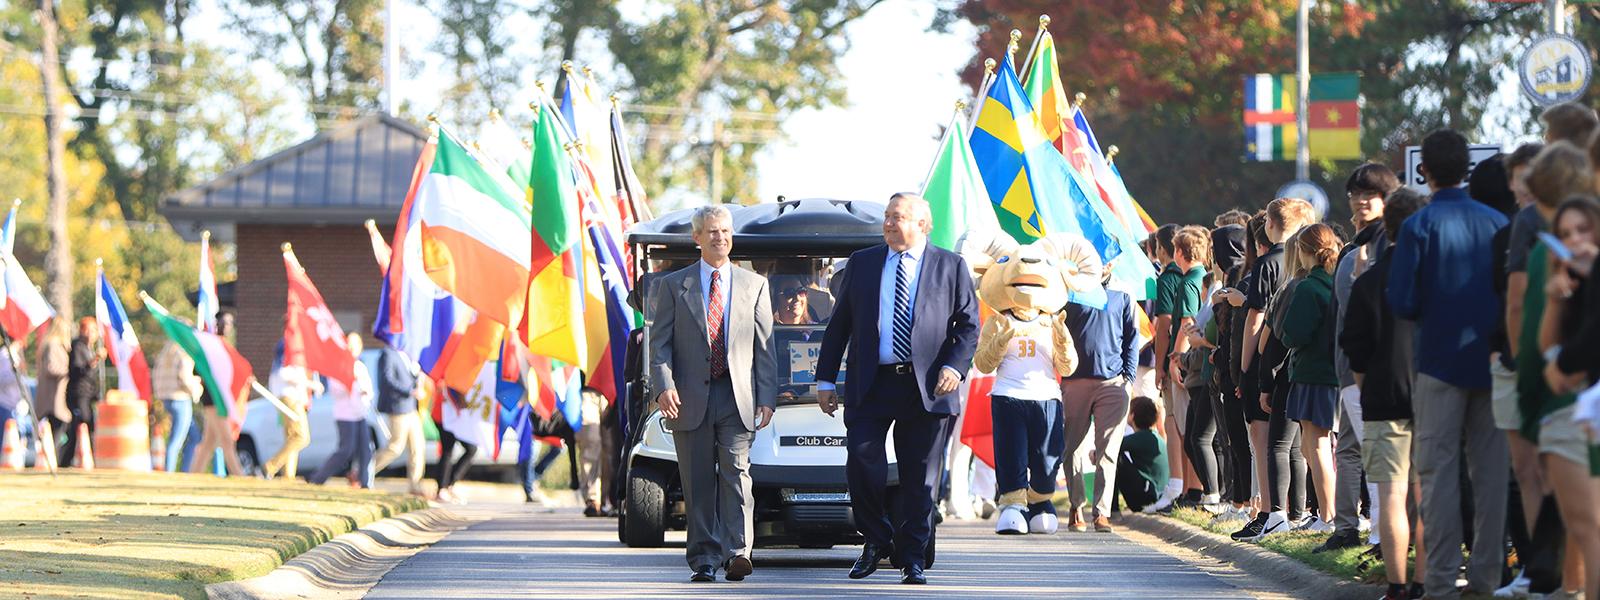 Chancellor Dr. Bill Jones (left) and President Dr. Mark A. Smith lead the parade of flags on International Boulevard. 